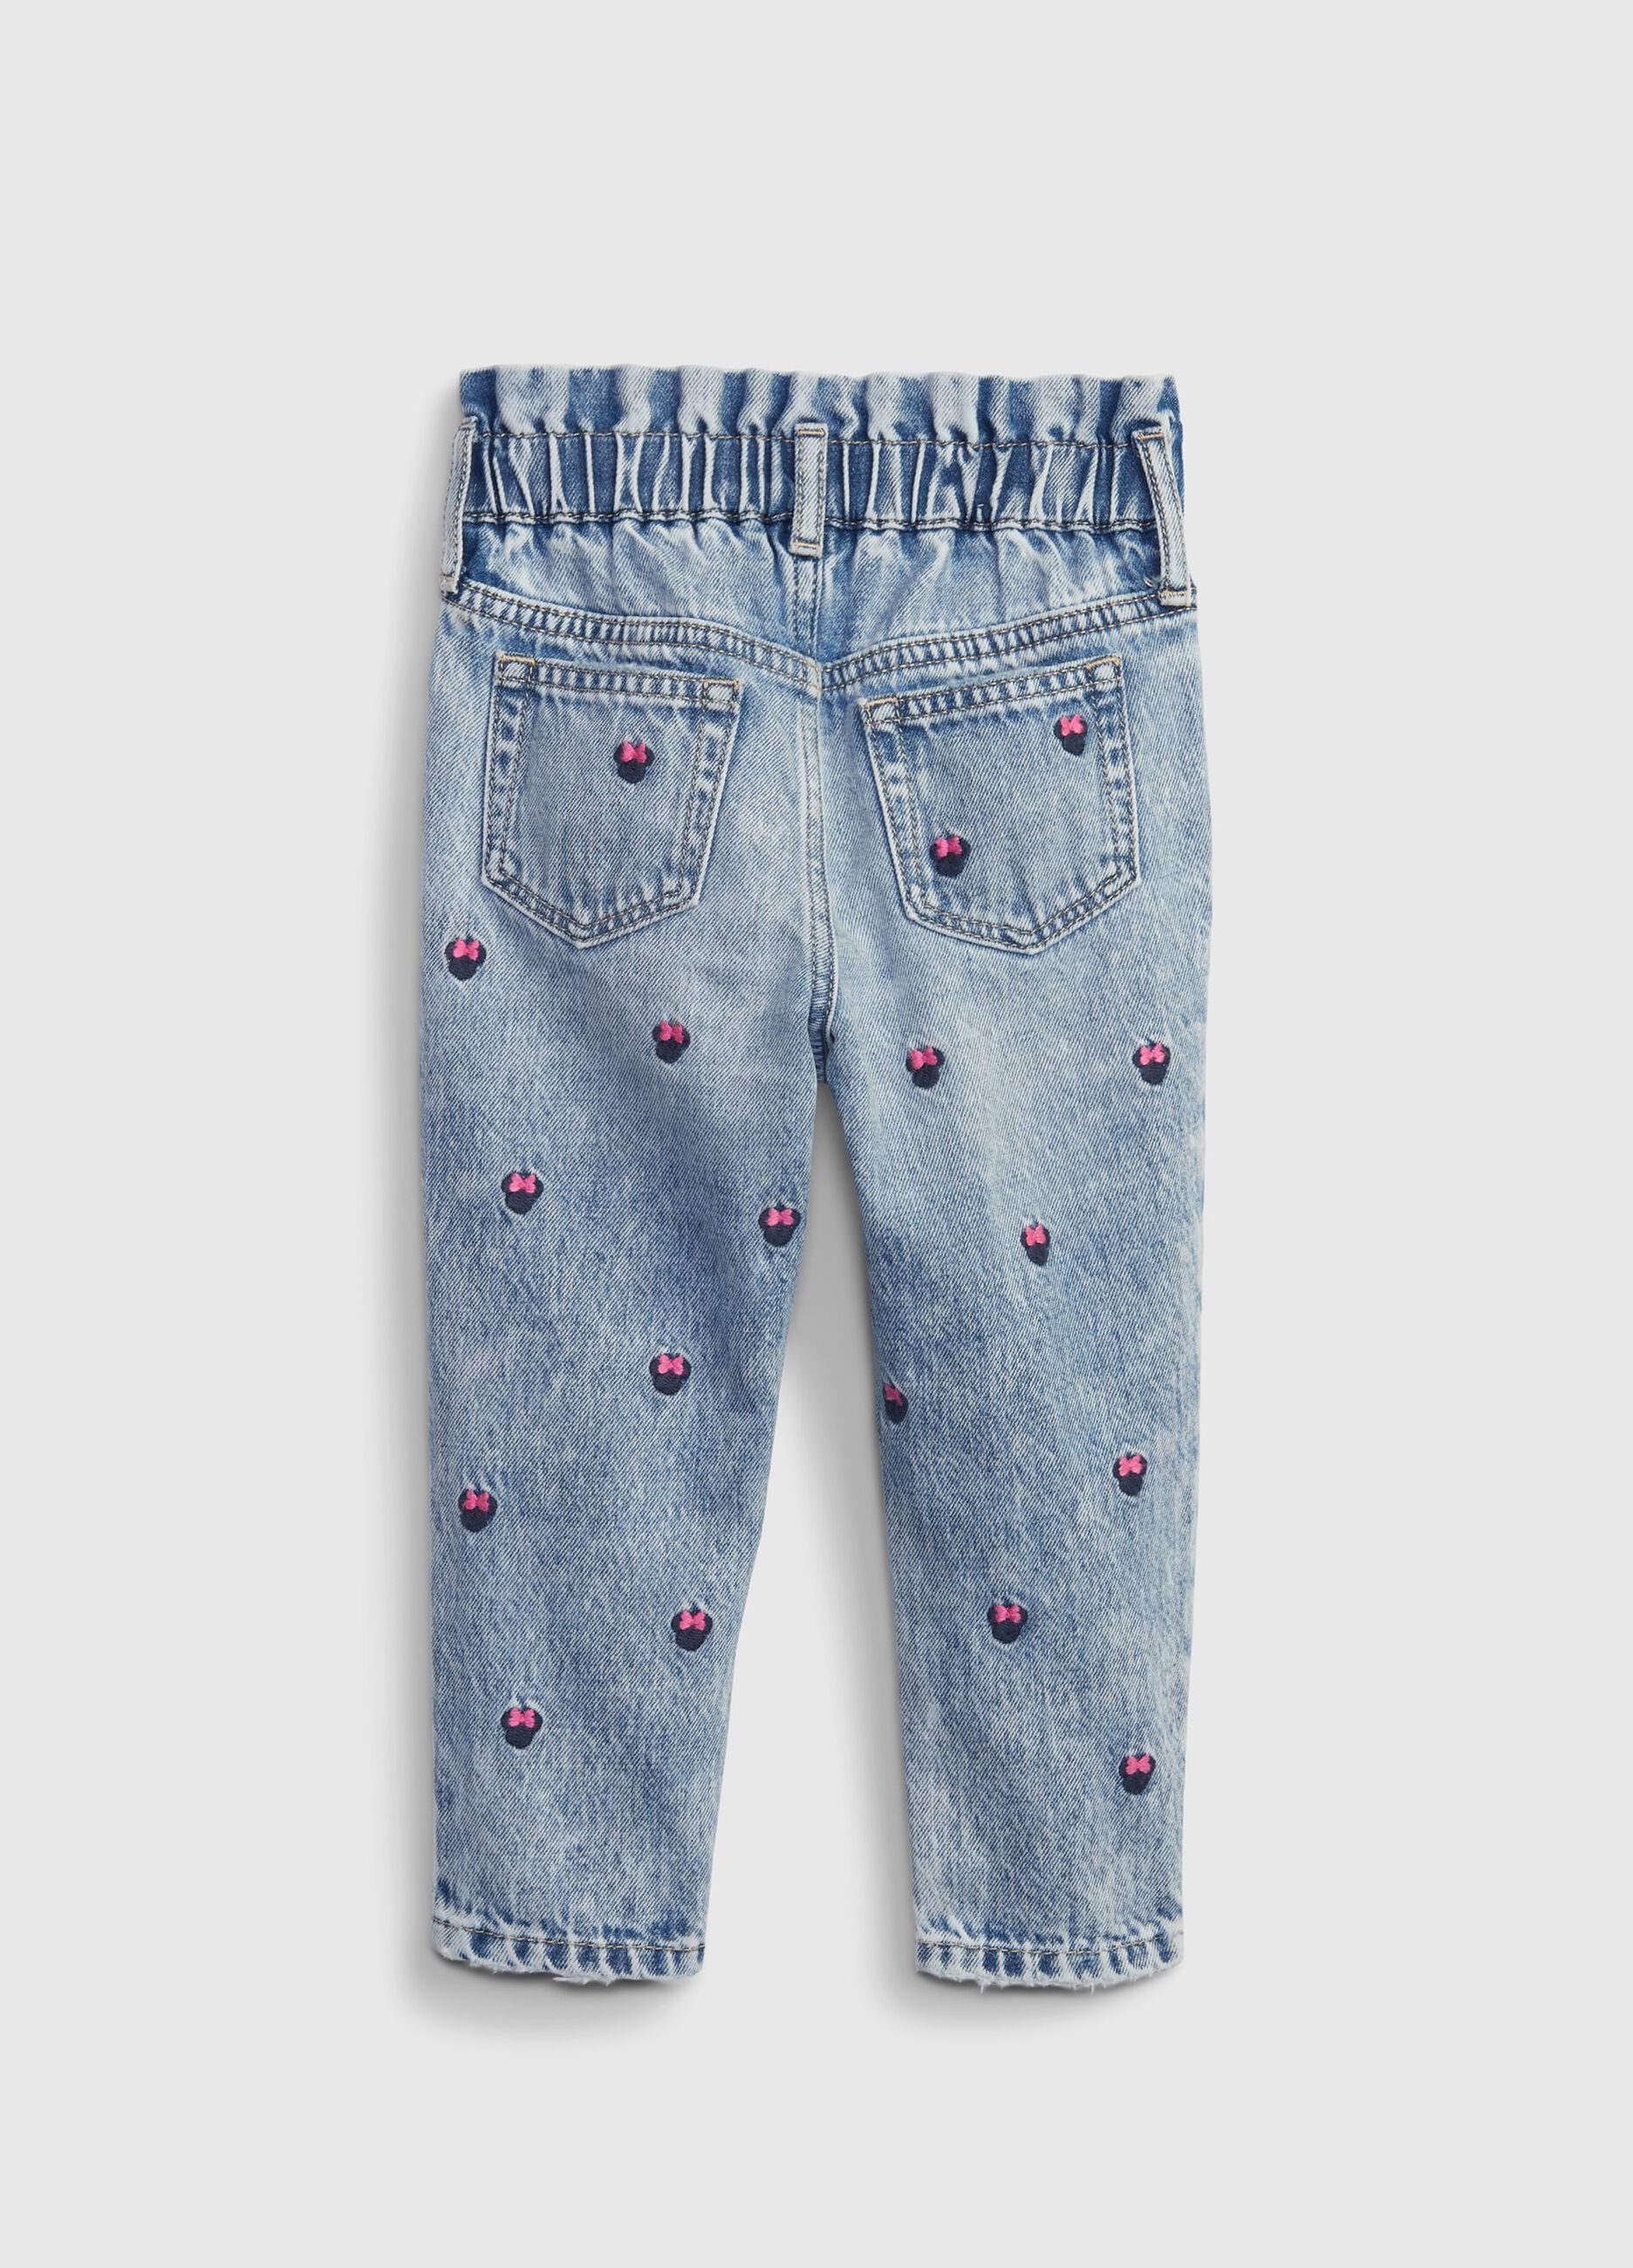 Jeans with Disney Baby Minnie Mouse embroidery